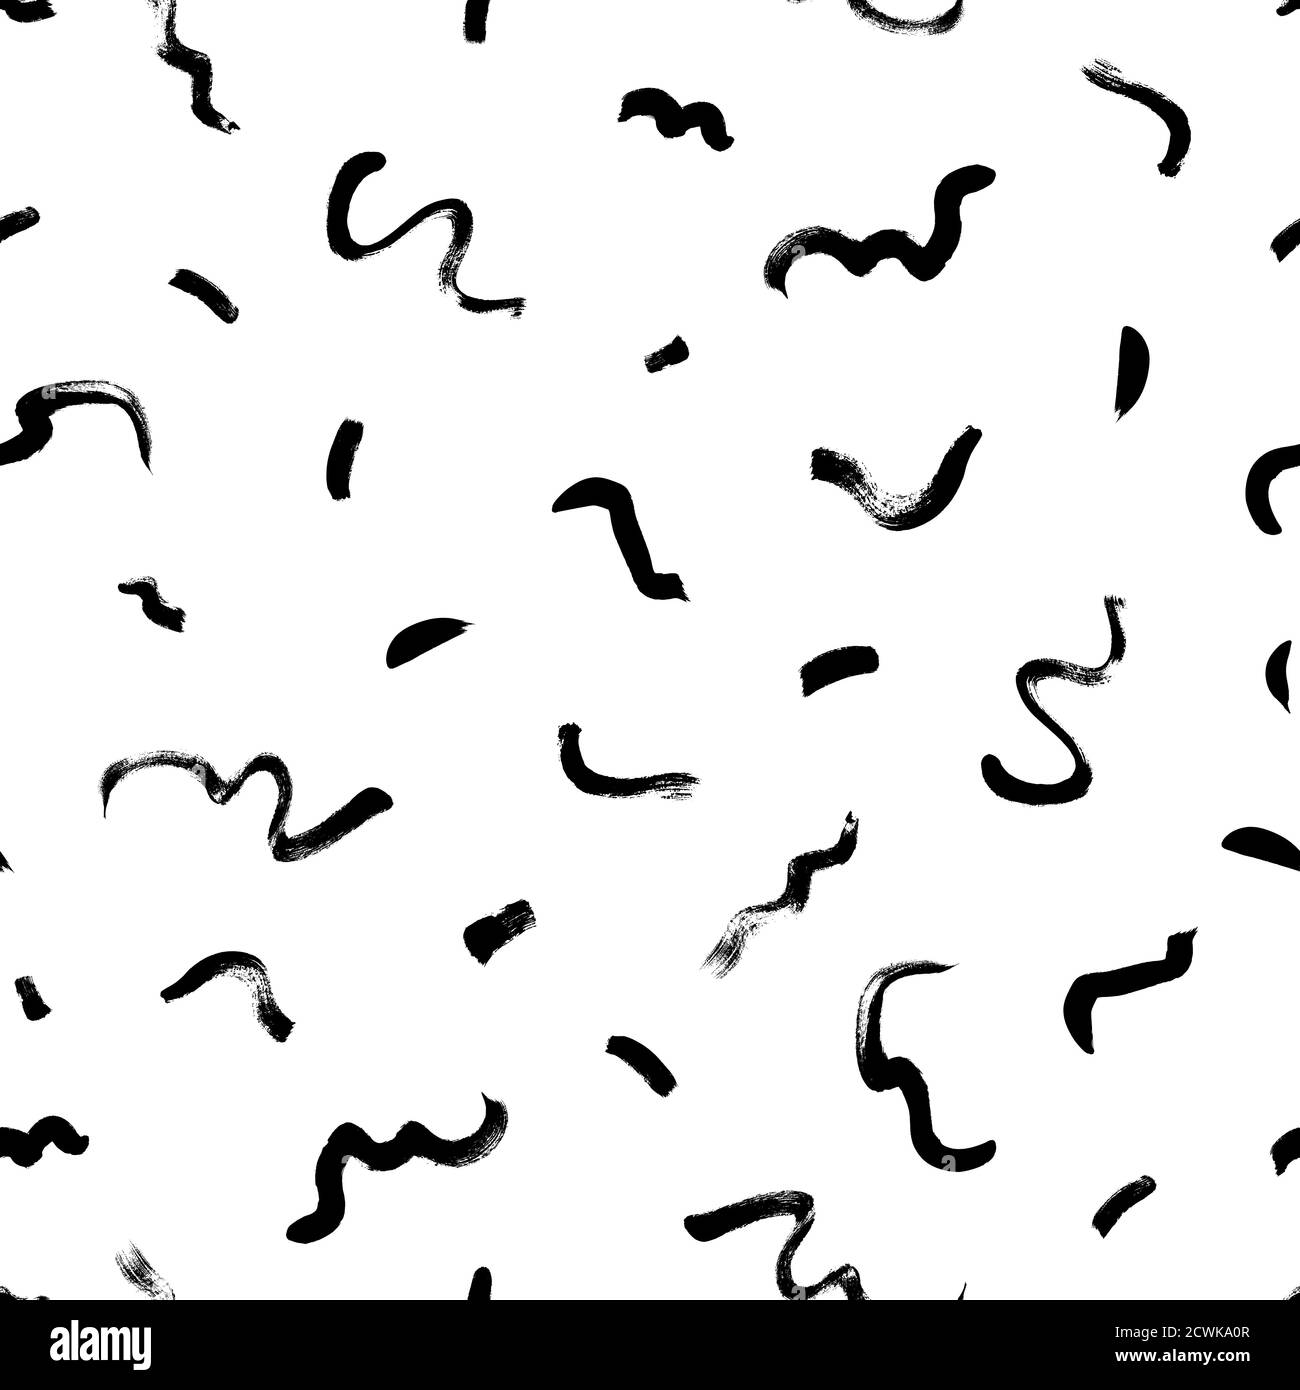 Black freehand scribbles vector seamless pattern.  Stock Vector